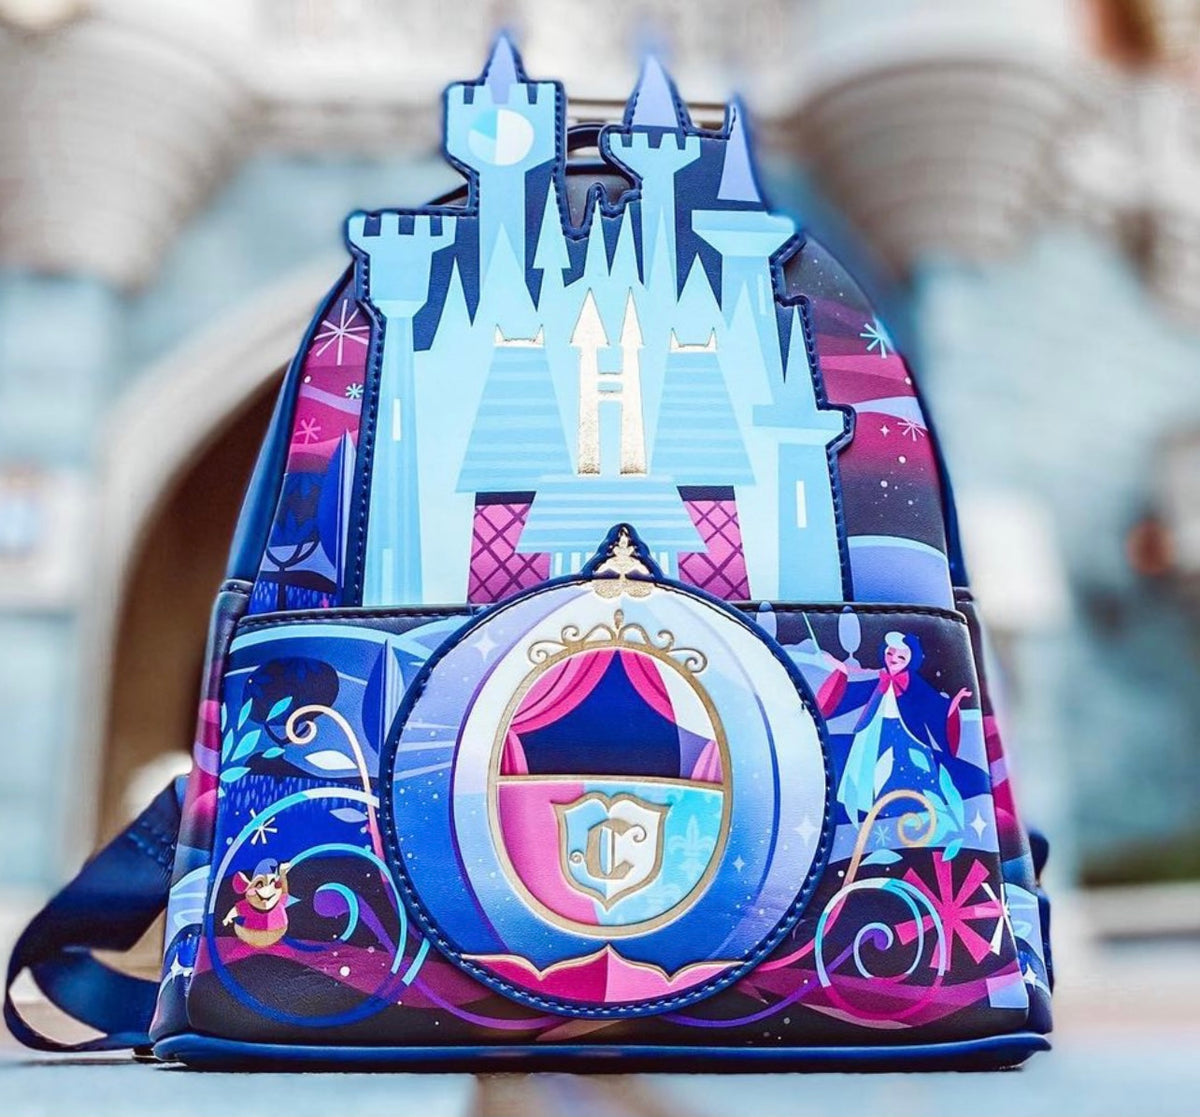 Buy Cinderella Exclusive Holiday Castle Light Up Mini Backpack at